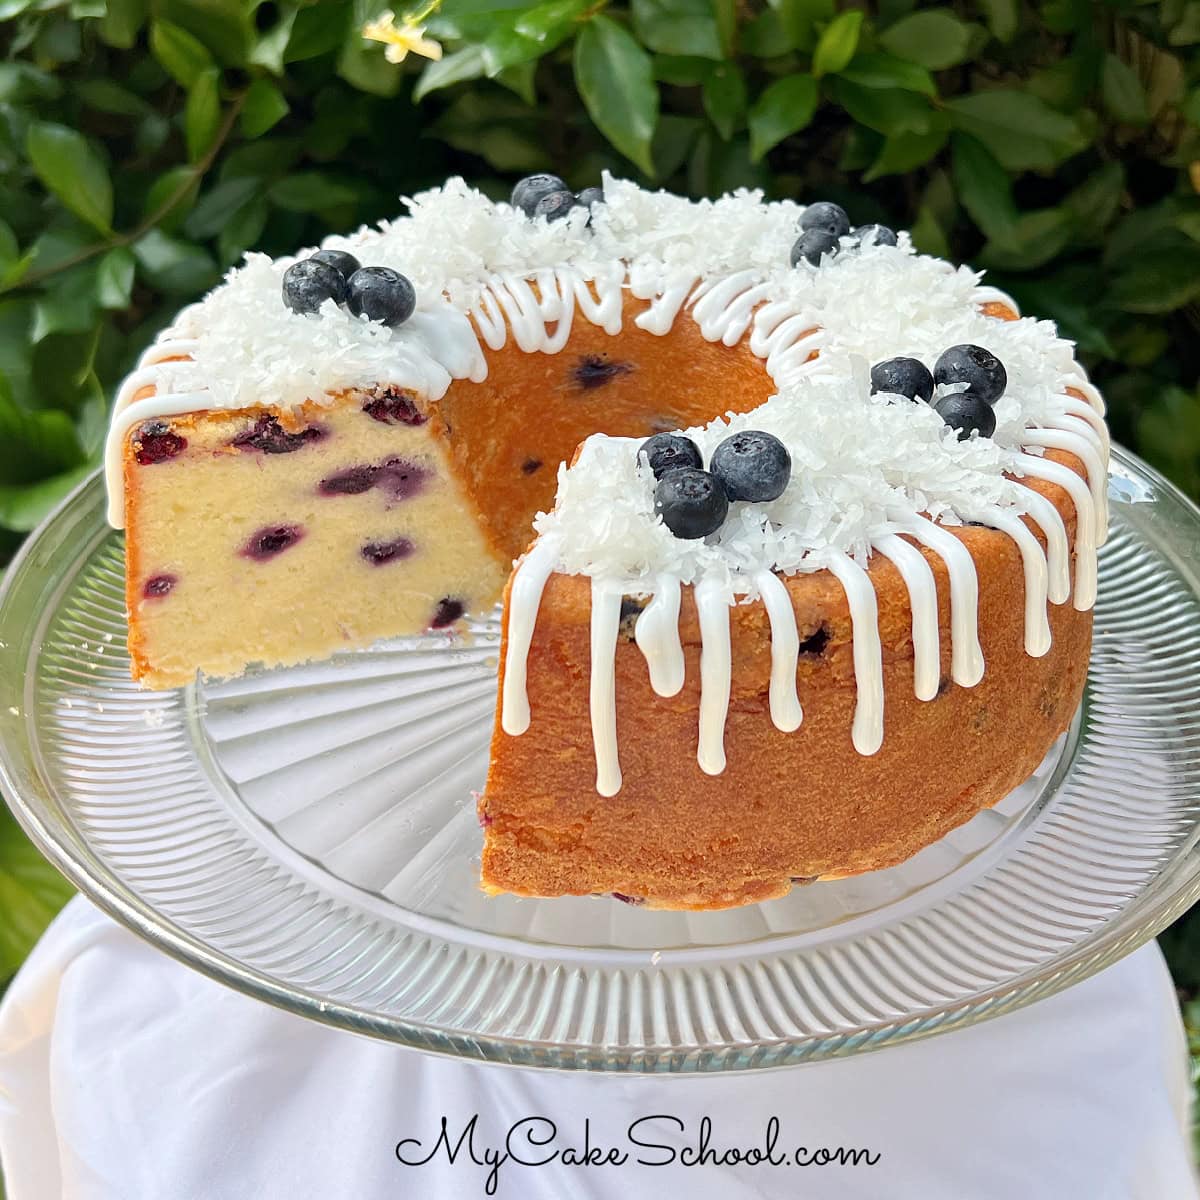 Blueberry Coconut Pound Cake, sliced, on a pedestal. It is topped with a coconut glaze, flaked coconut, and fresh blueberries.